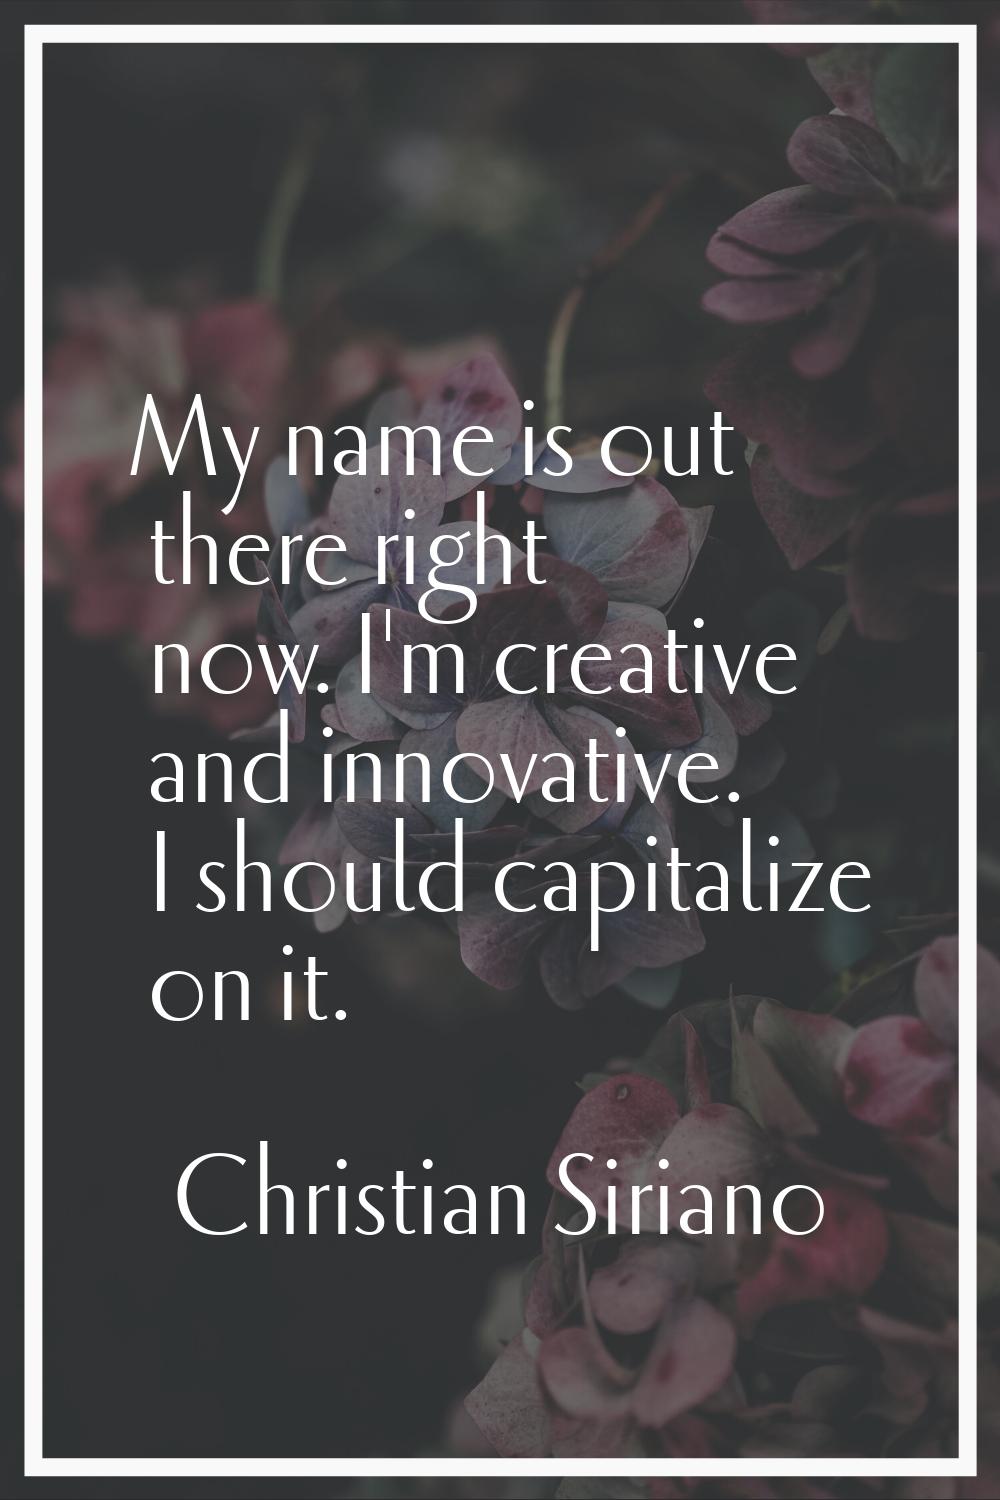 My name is out there right now. I'm creative and innovative. I should capitalize on it.